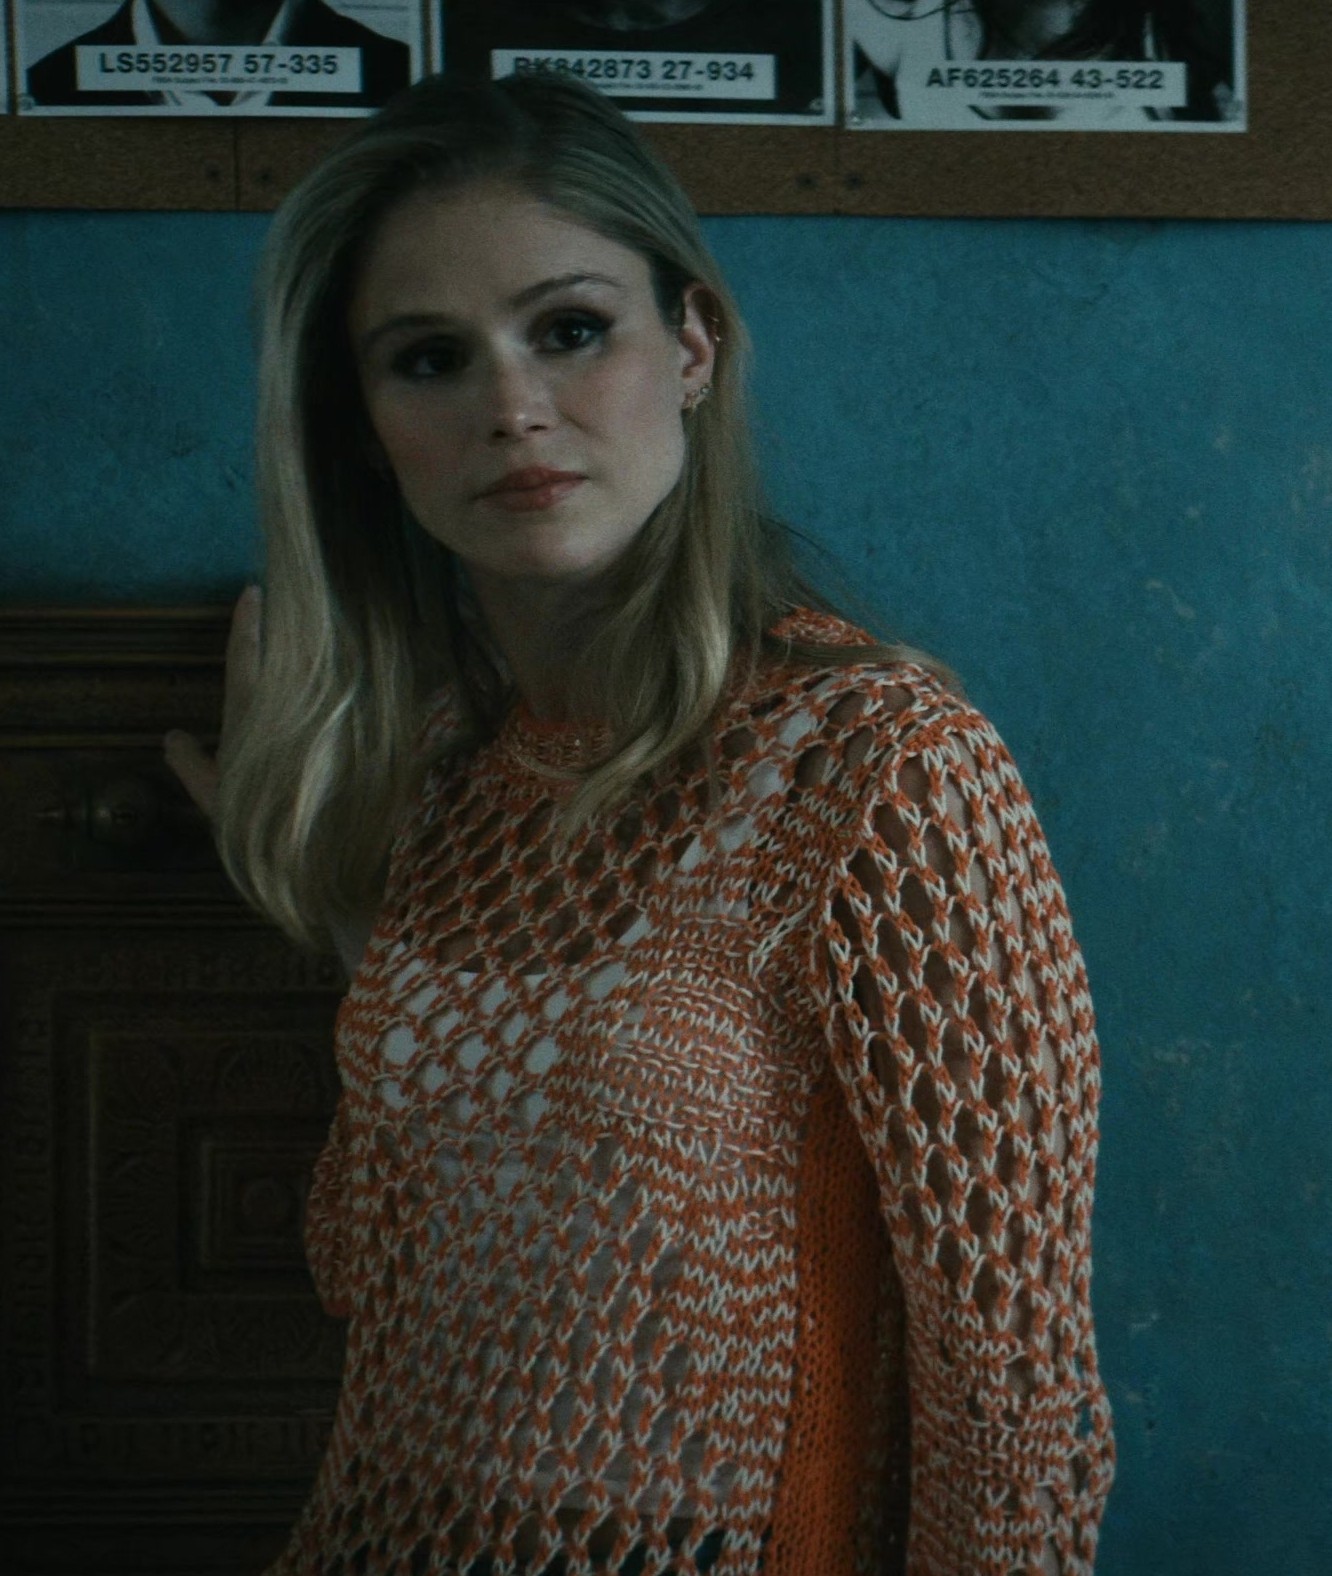 Worn on The Boys TV Show - Orange Crochet Knit Top Worn by Erin Moriarty as Annie January / Starlight